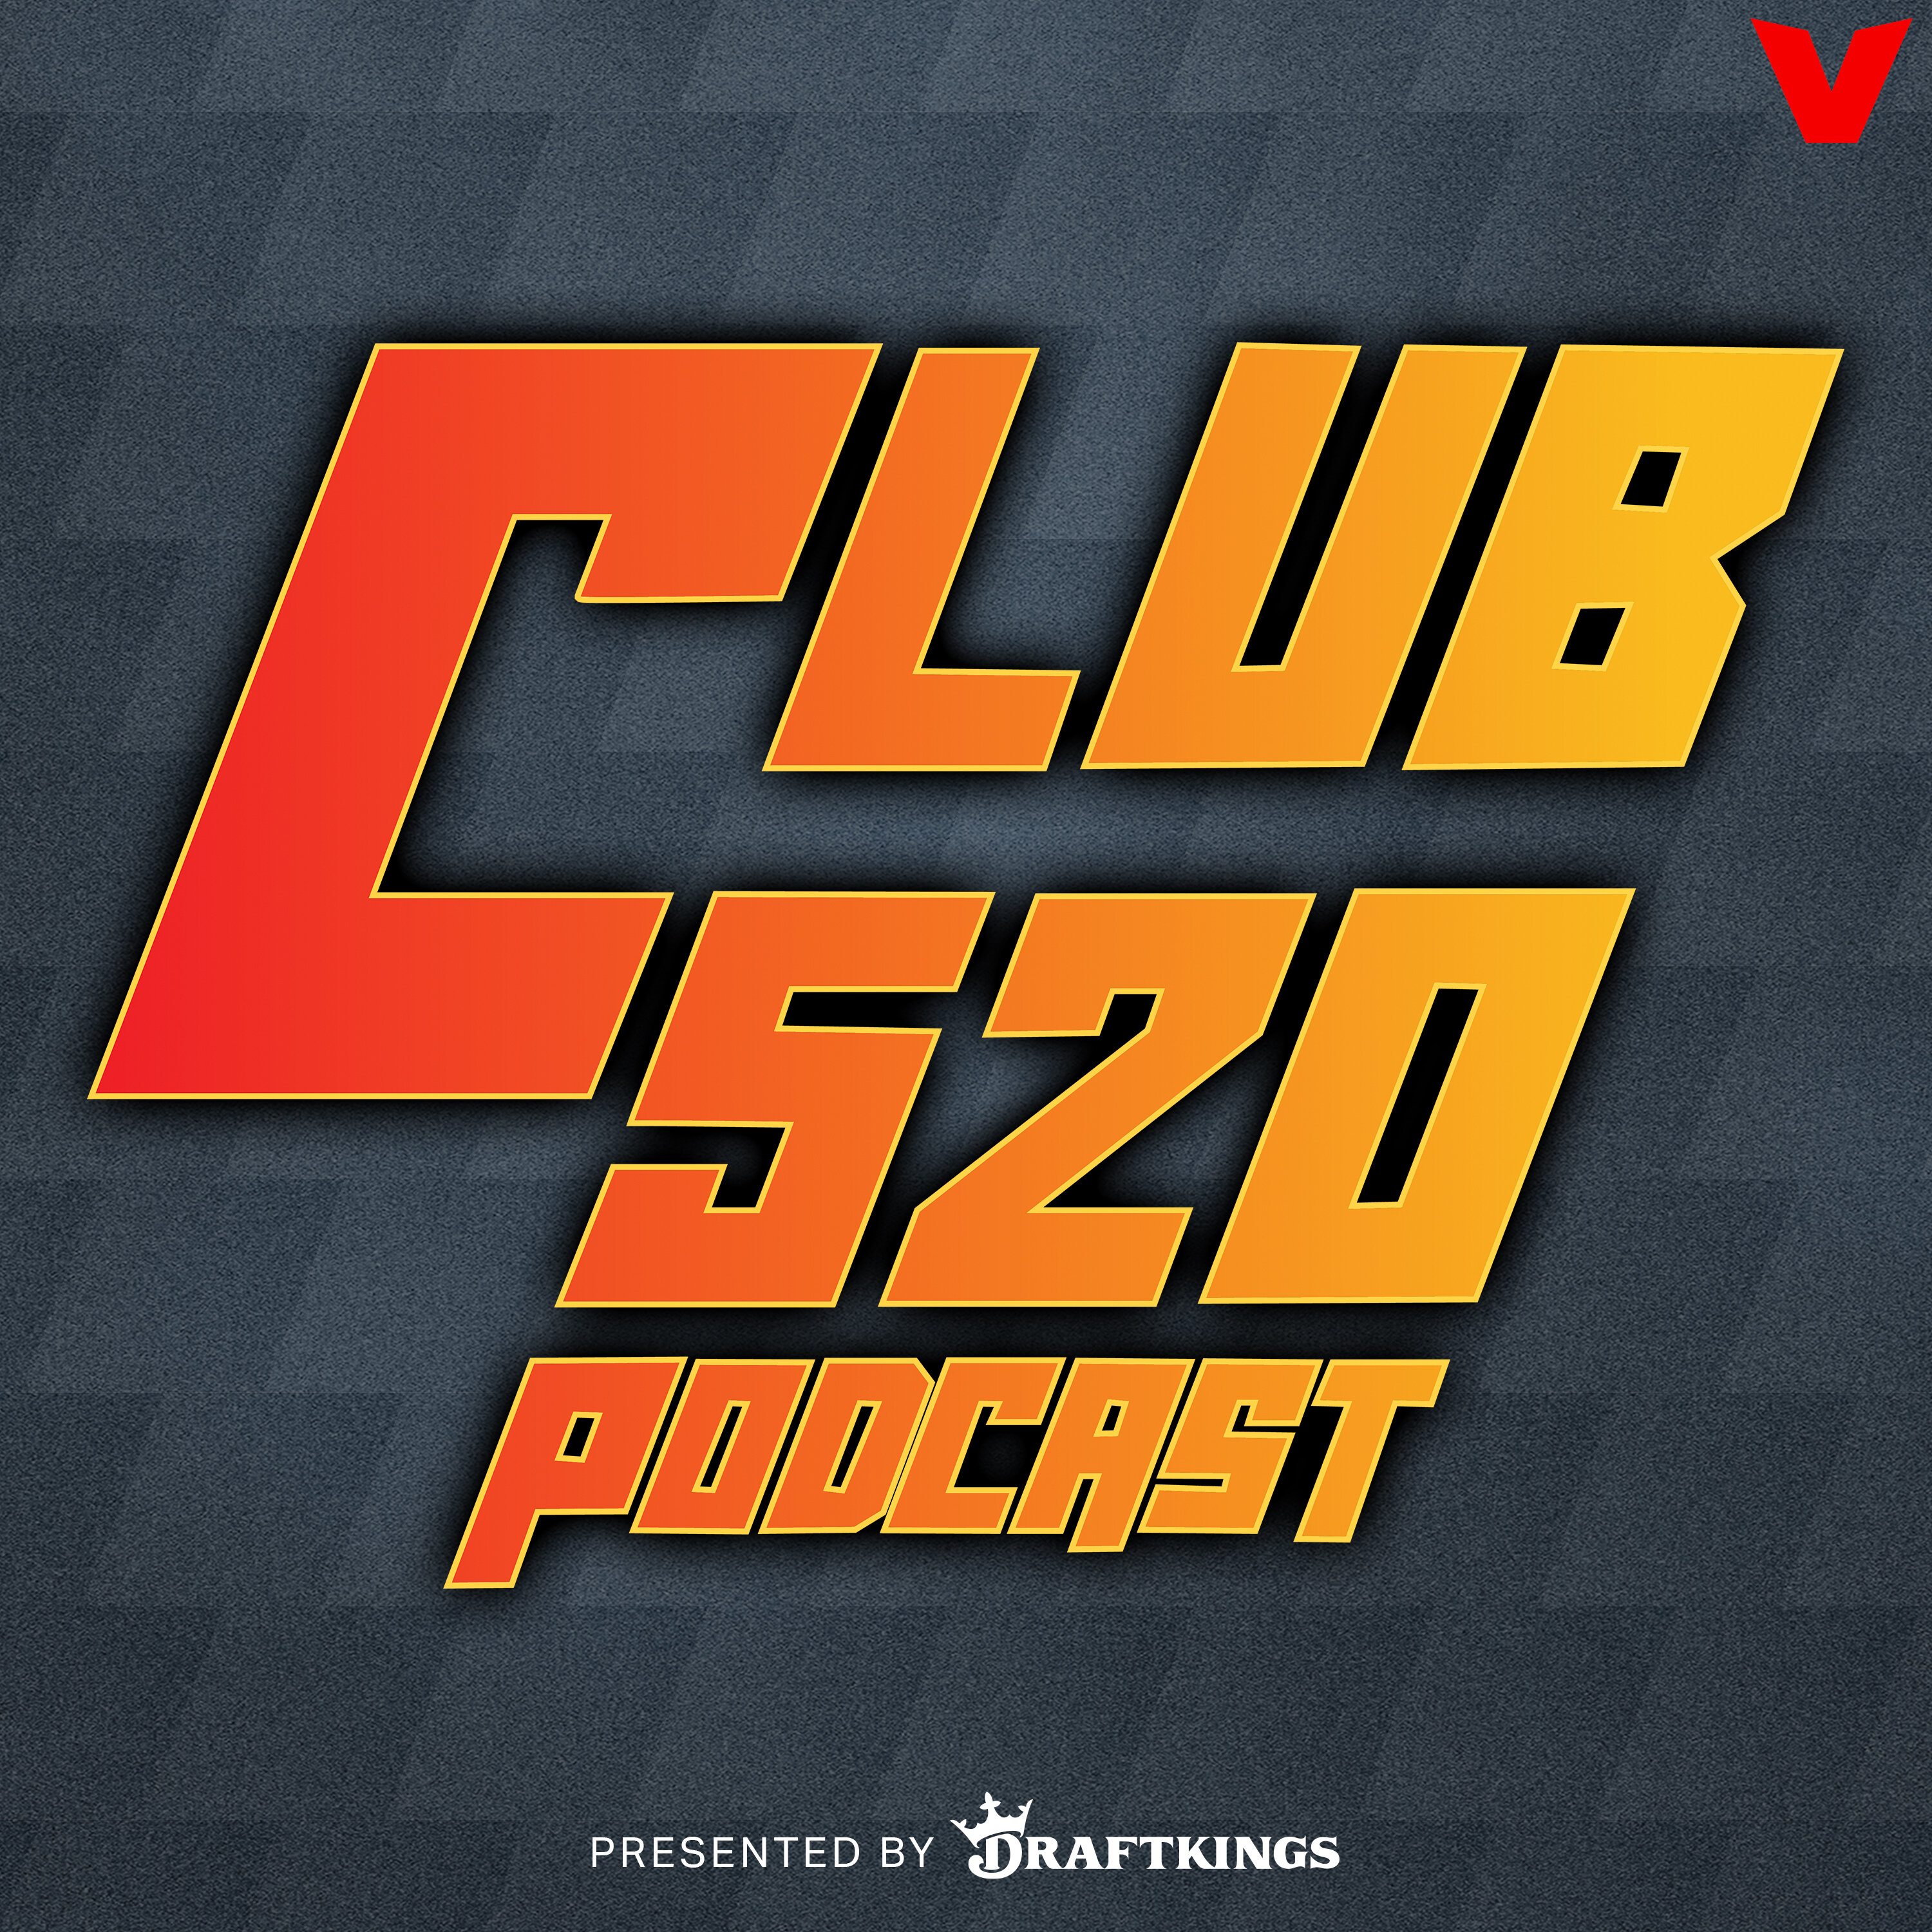 Club 520 - Jeff Teague on Draymond Green ejection & end of the Warriors? + WILD NBA ref story by iHeartPodcasts and The Volume